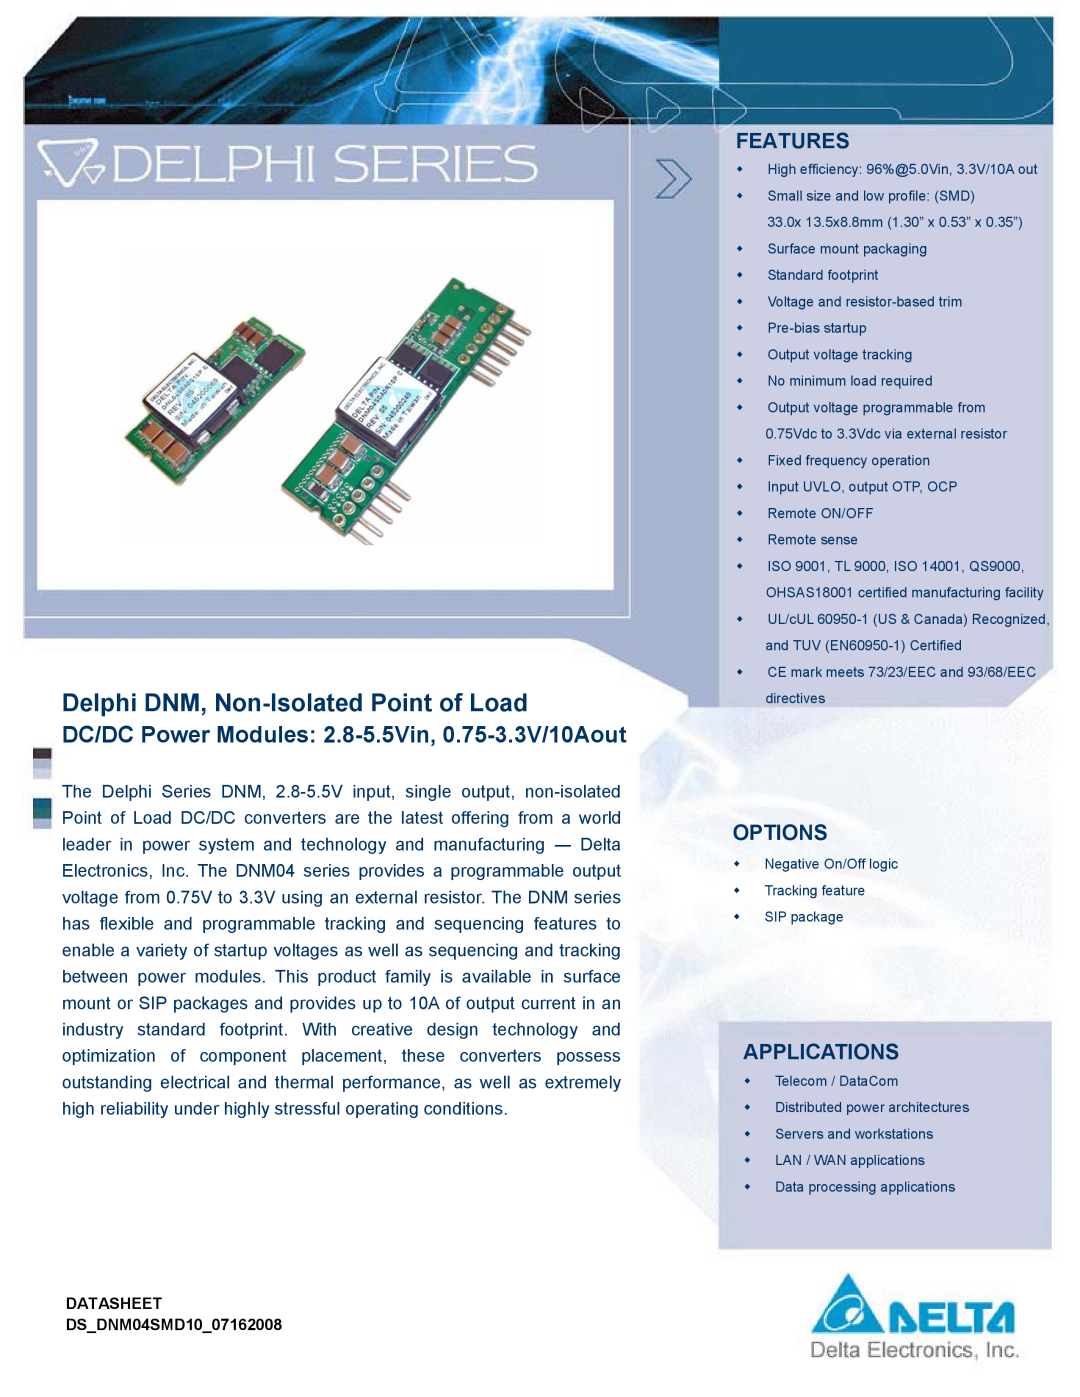 Delta Electronics 0.75-3.3V, 10A, 2.8-5.5Vin manual Delphi DNM, Non-Isolated Point of Load, Features, Options, Applications 